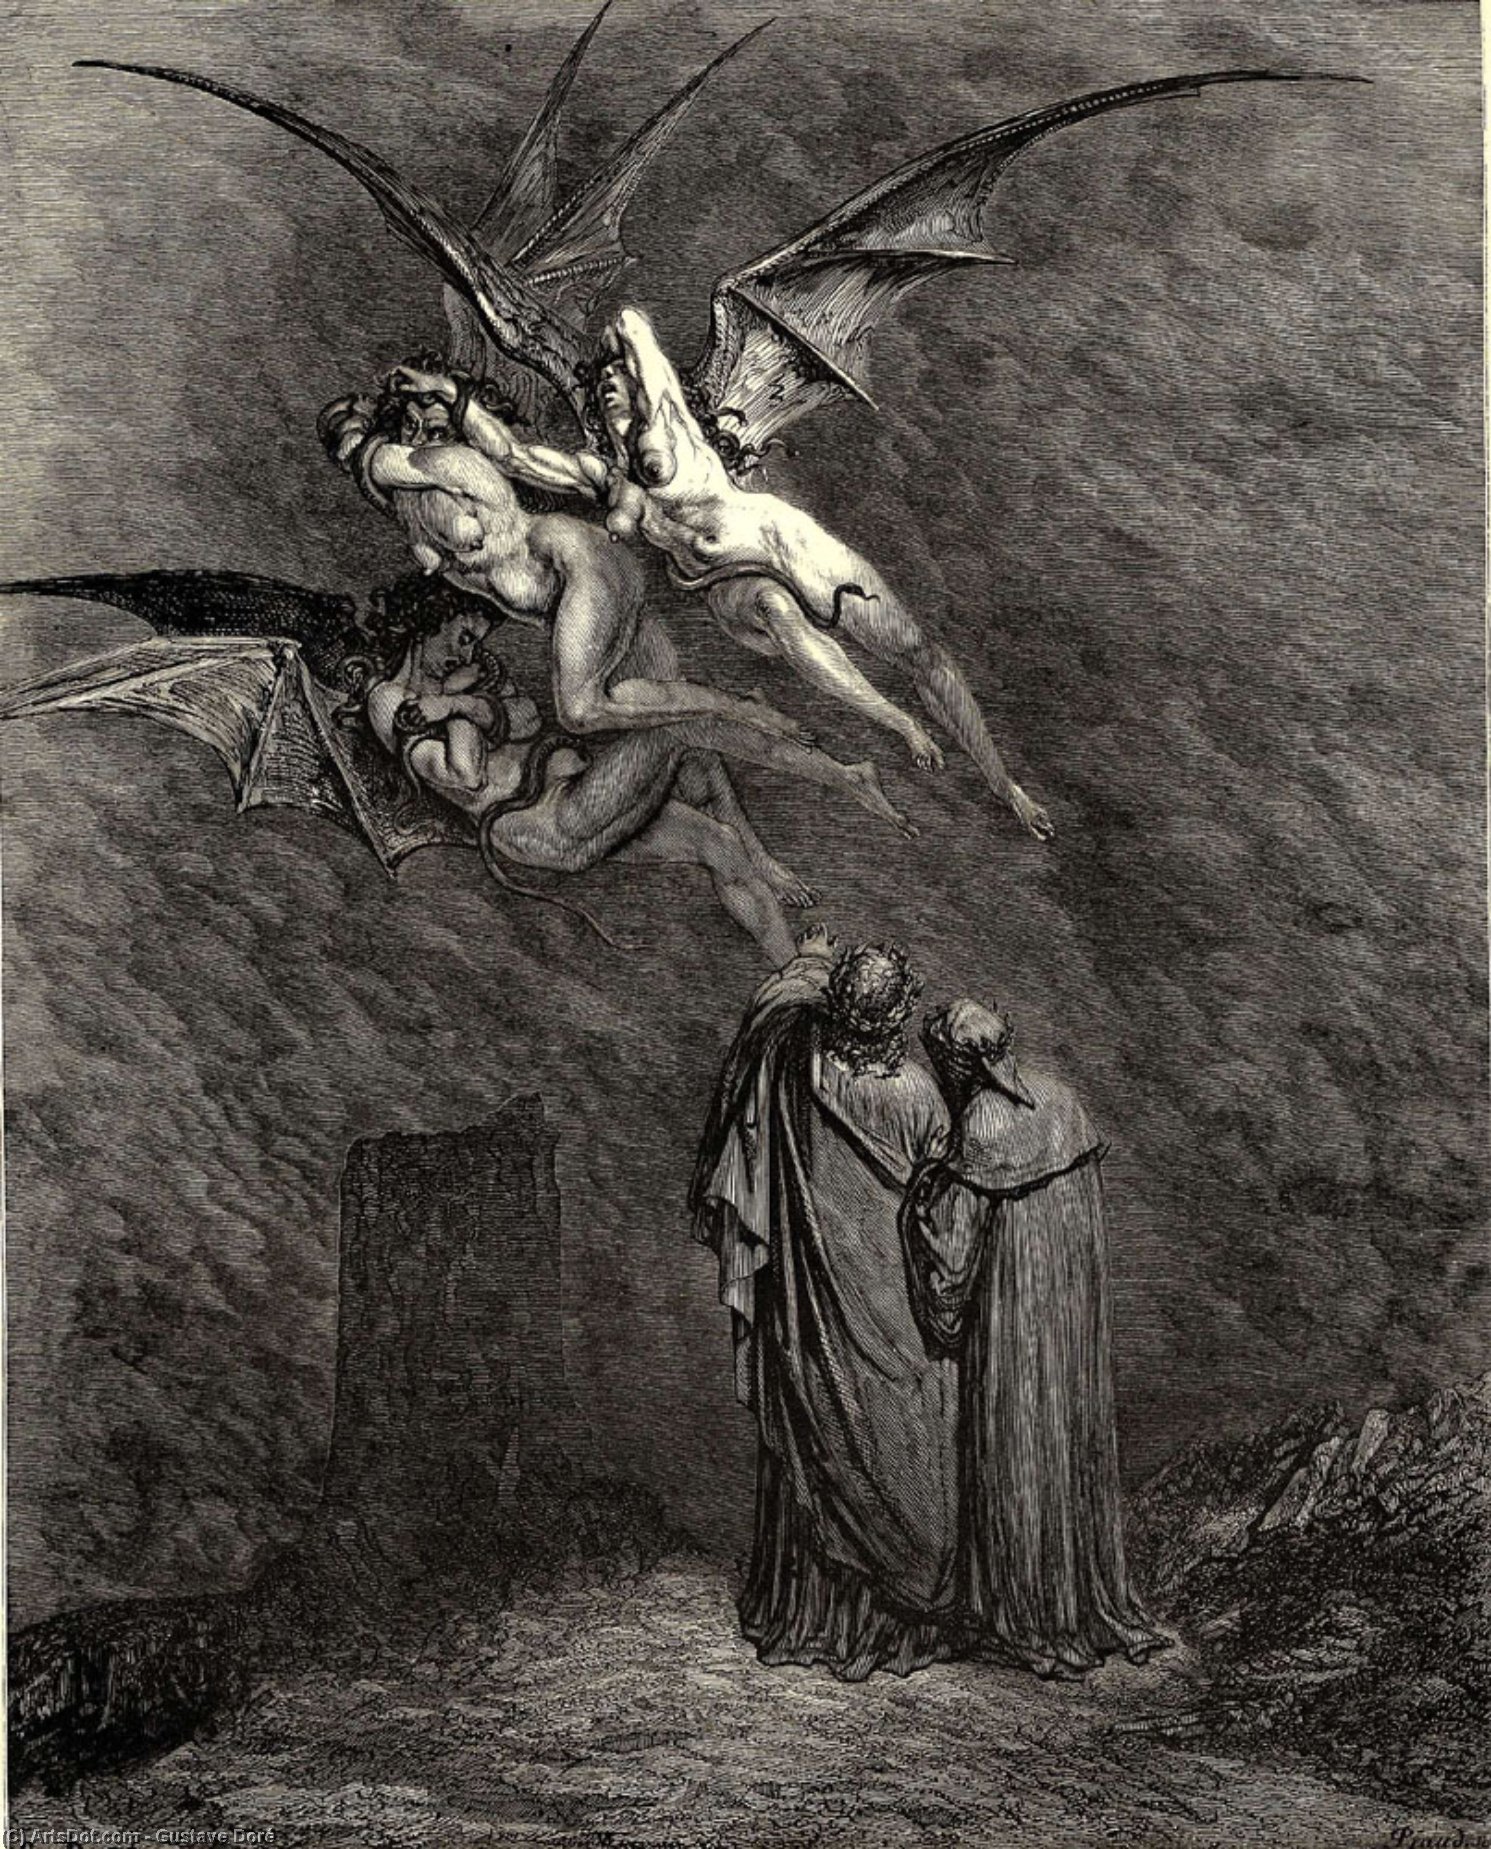 WikiOO.org - 백과 사전 - 회화, 삽화 Paul Gustave Doré - The Inferno, Canto 9, line 46. “Mark thou each dire Erinnys.